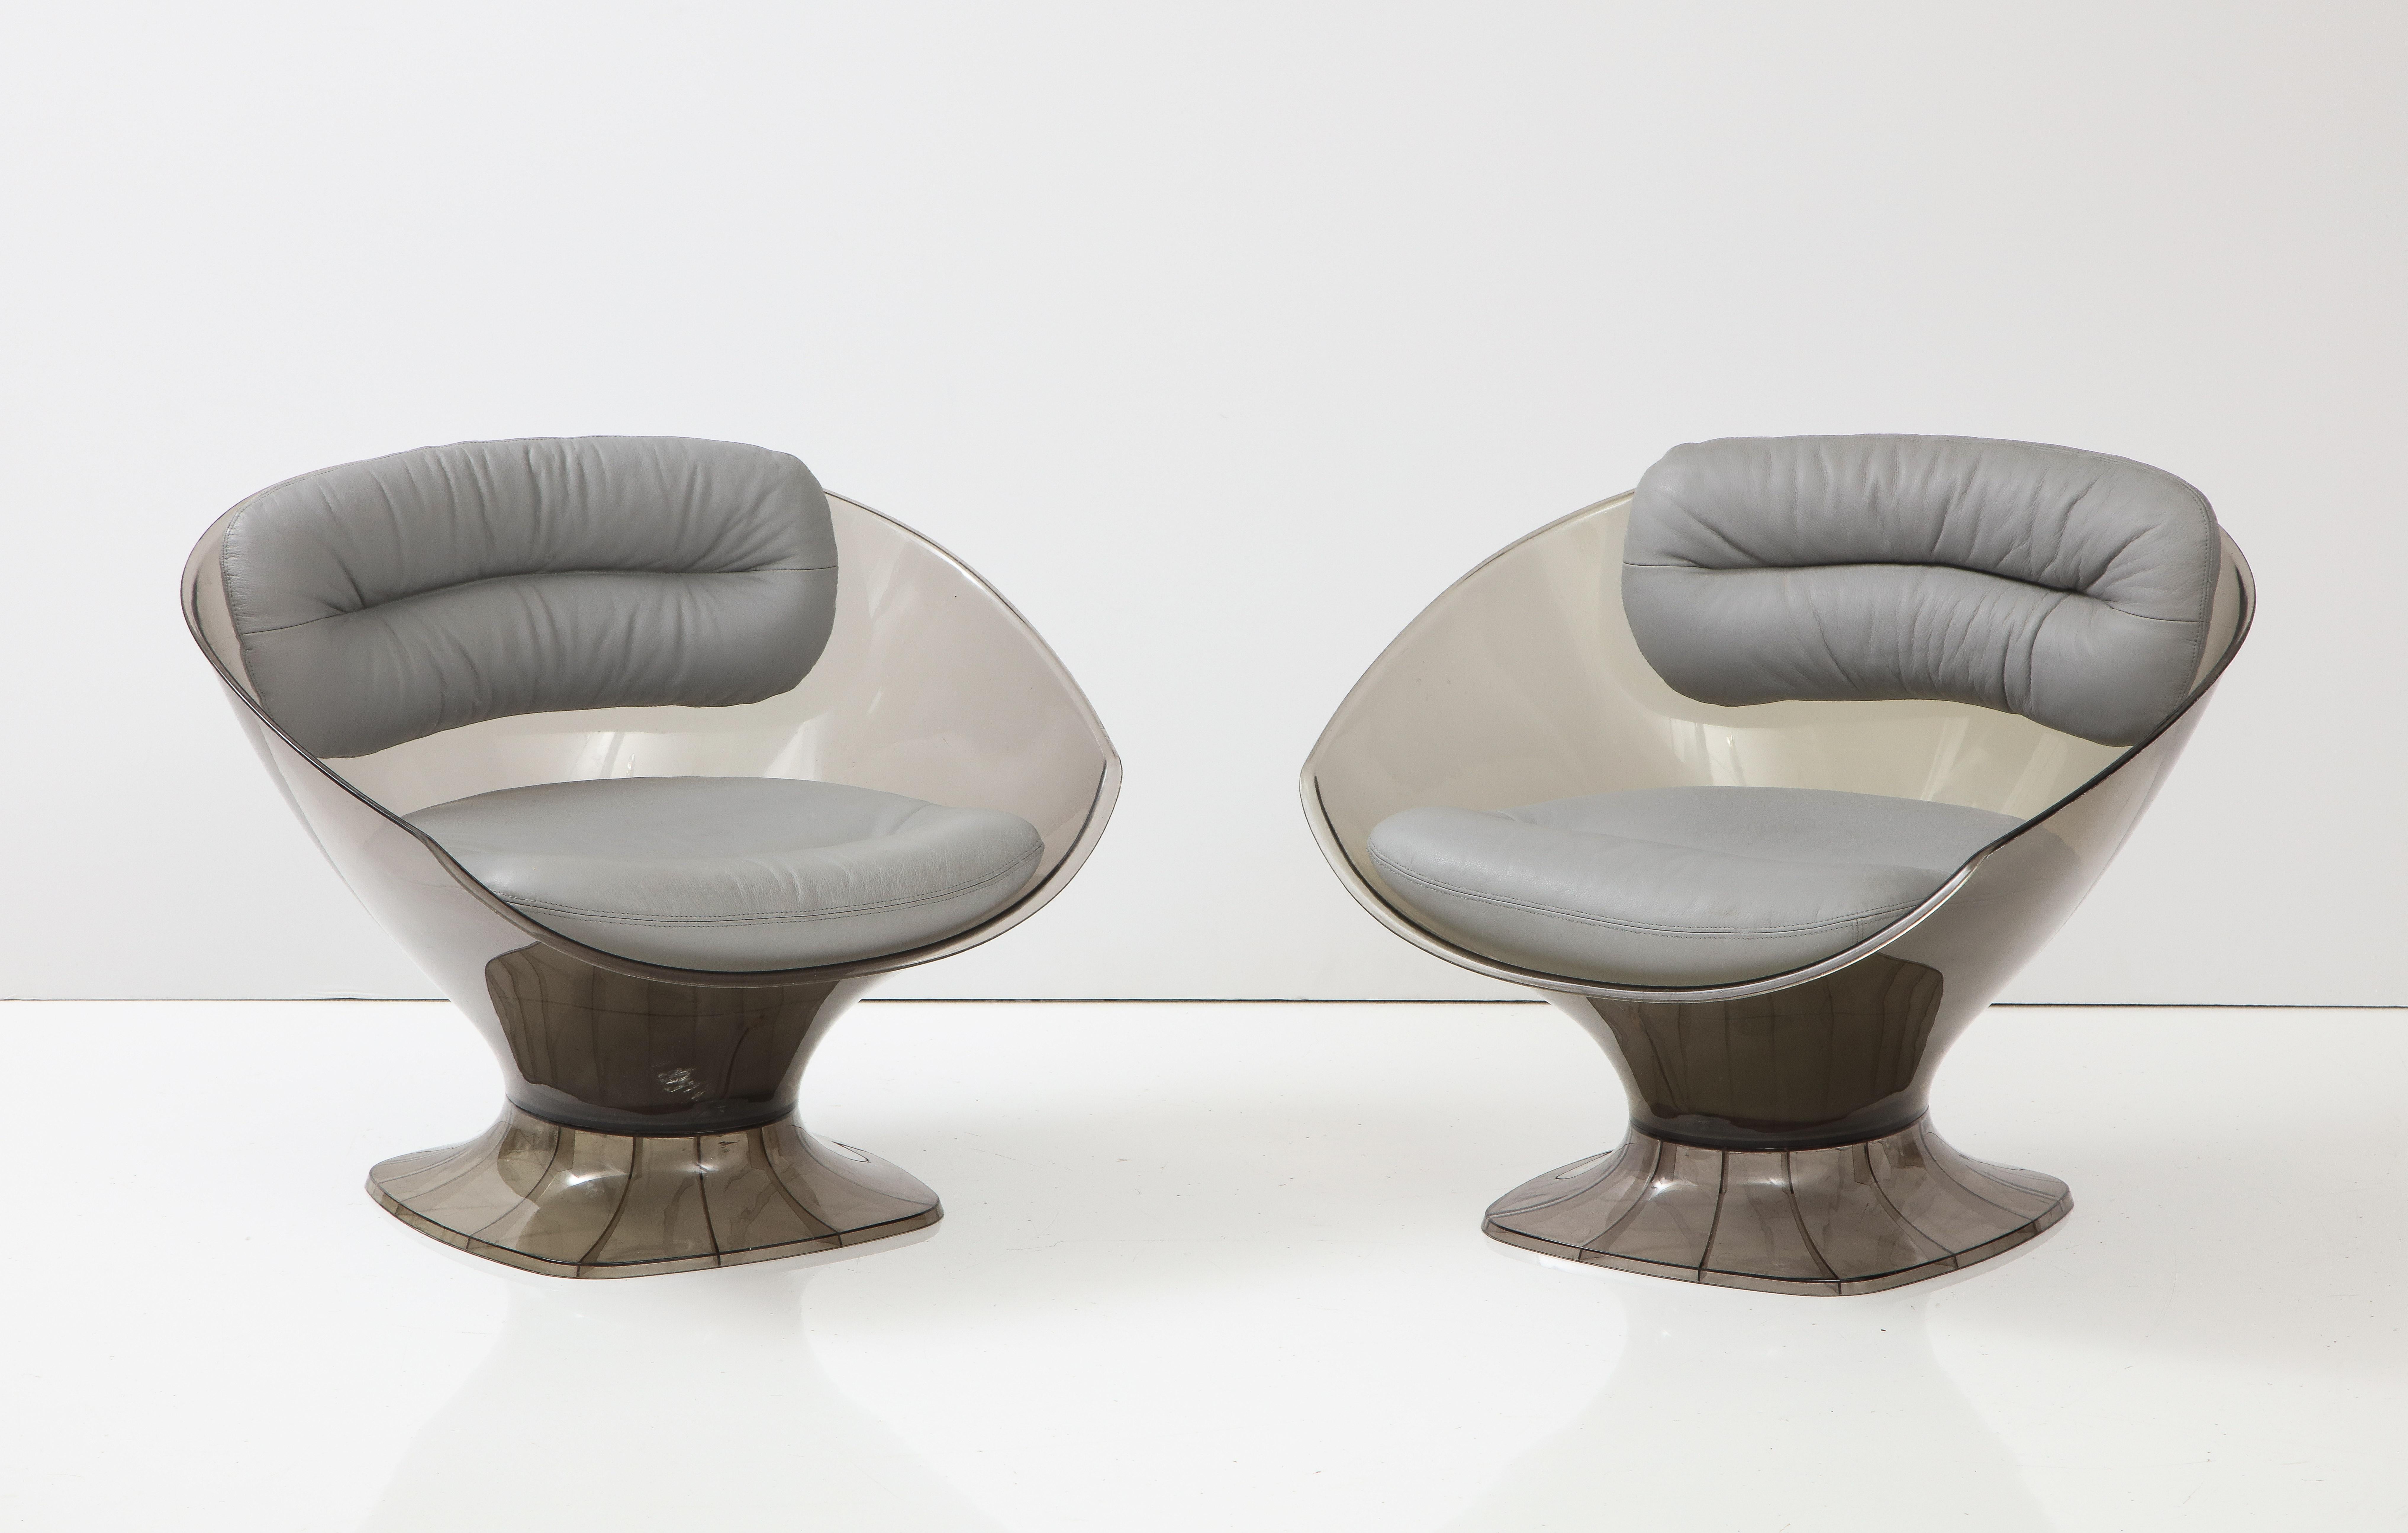 Modernist injection mold smokey grey acrylic chairs with grey leather cushions. Made in Germany for Raphael France, c60s.